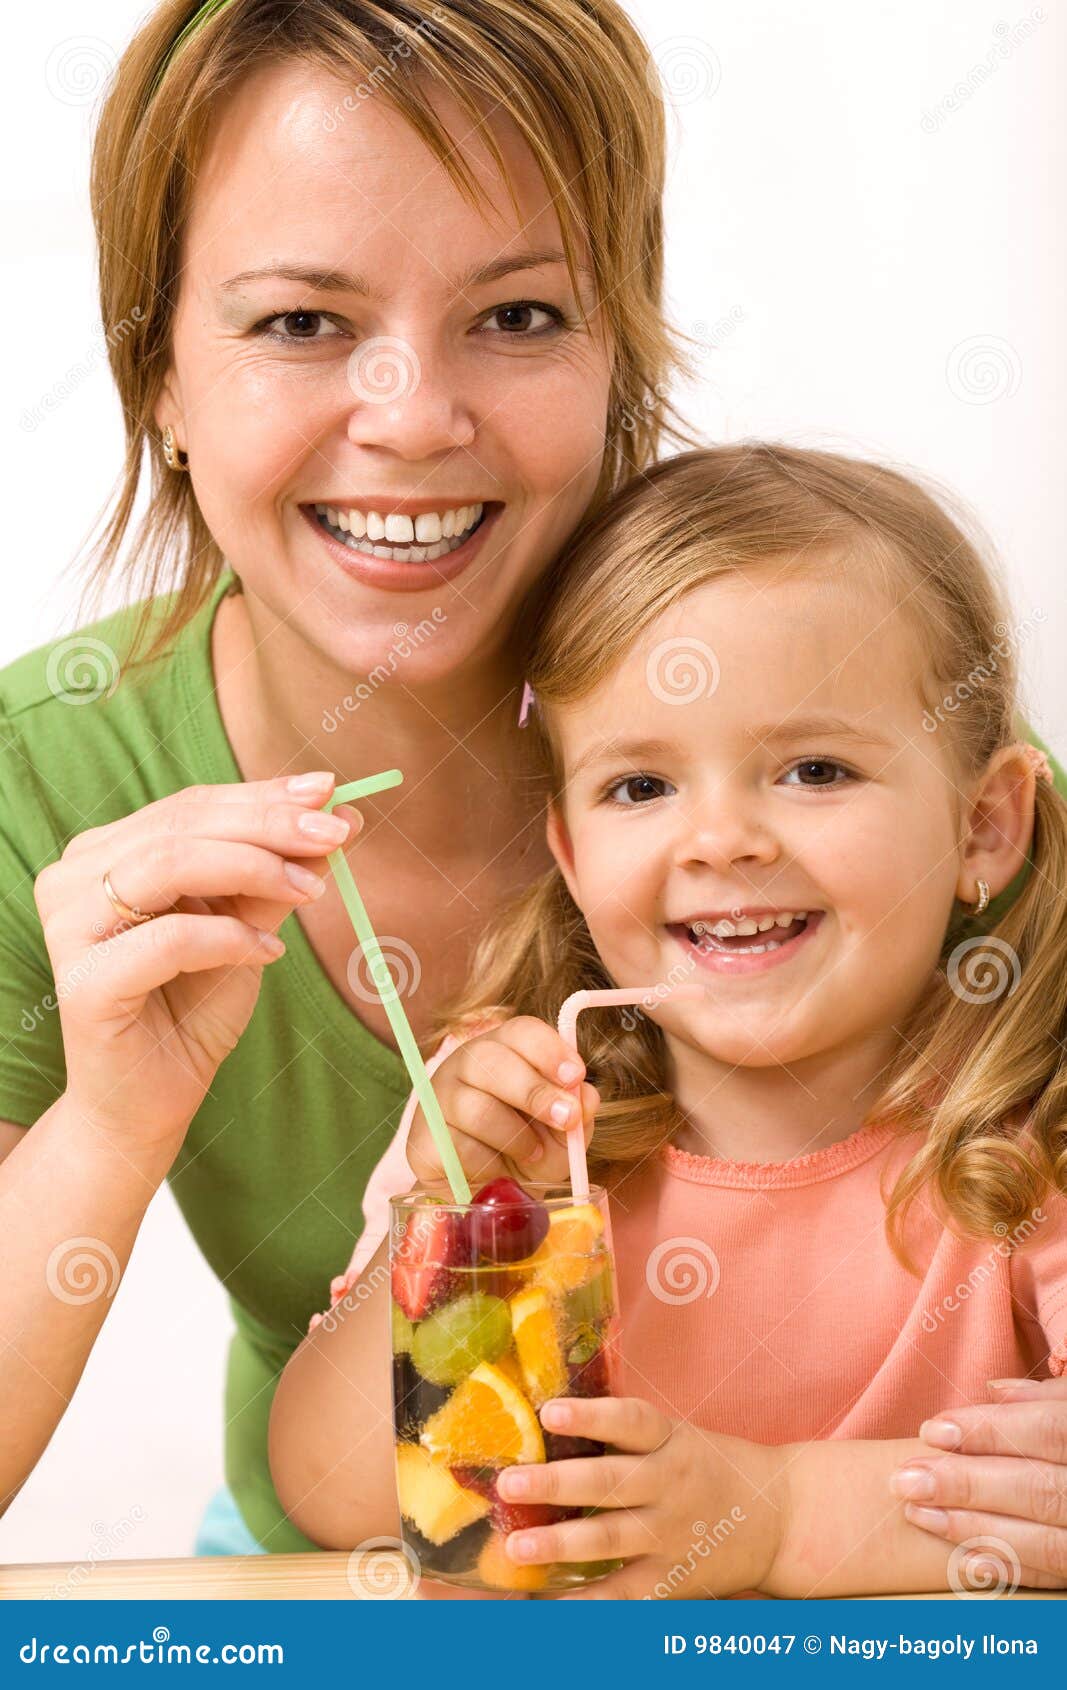 woman and little girl having a fruity refreshment